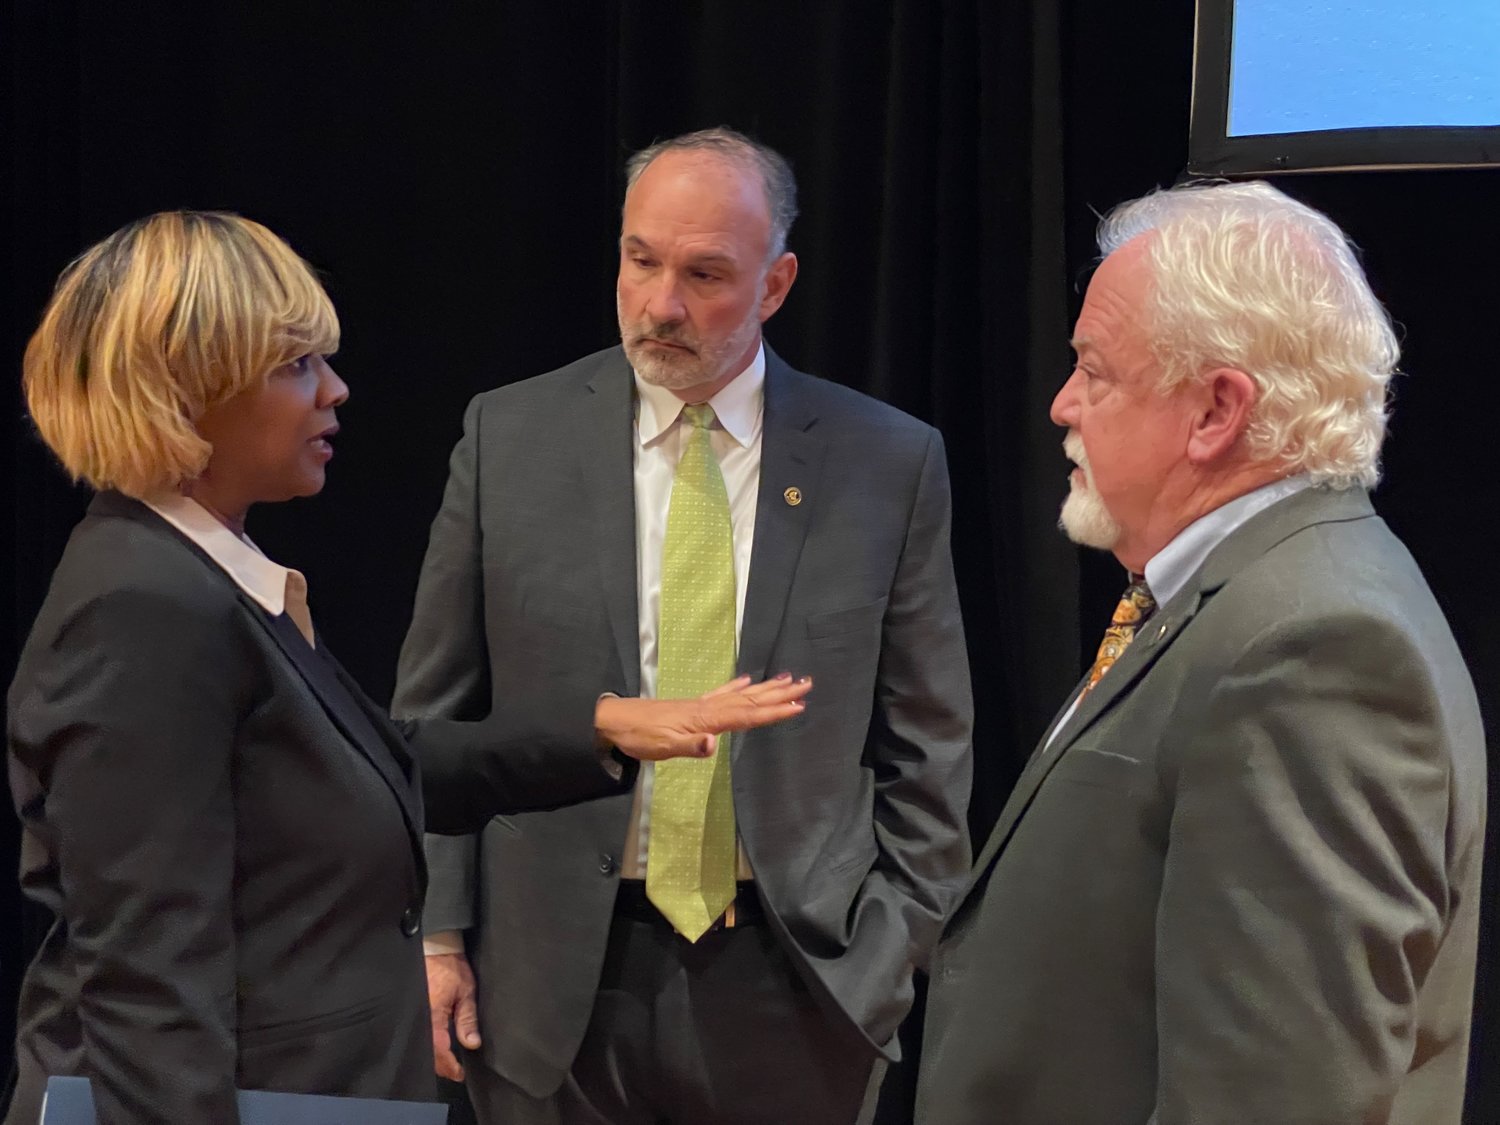 Board Chairwoman Toni Stewart talks with  Commissioners Jimmy Keefe and Michael Boose after Monday's meeting. Keefe and Boose voted against Stewart's nomination for chairwoman. The two said there was a lack of prior discussion about who would lead the board, and that their votes were nothing personal against Stewart.